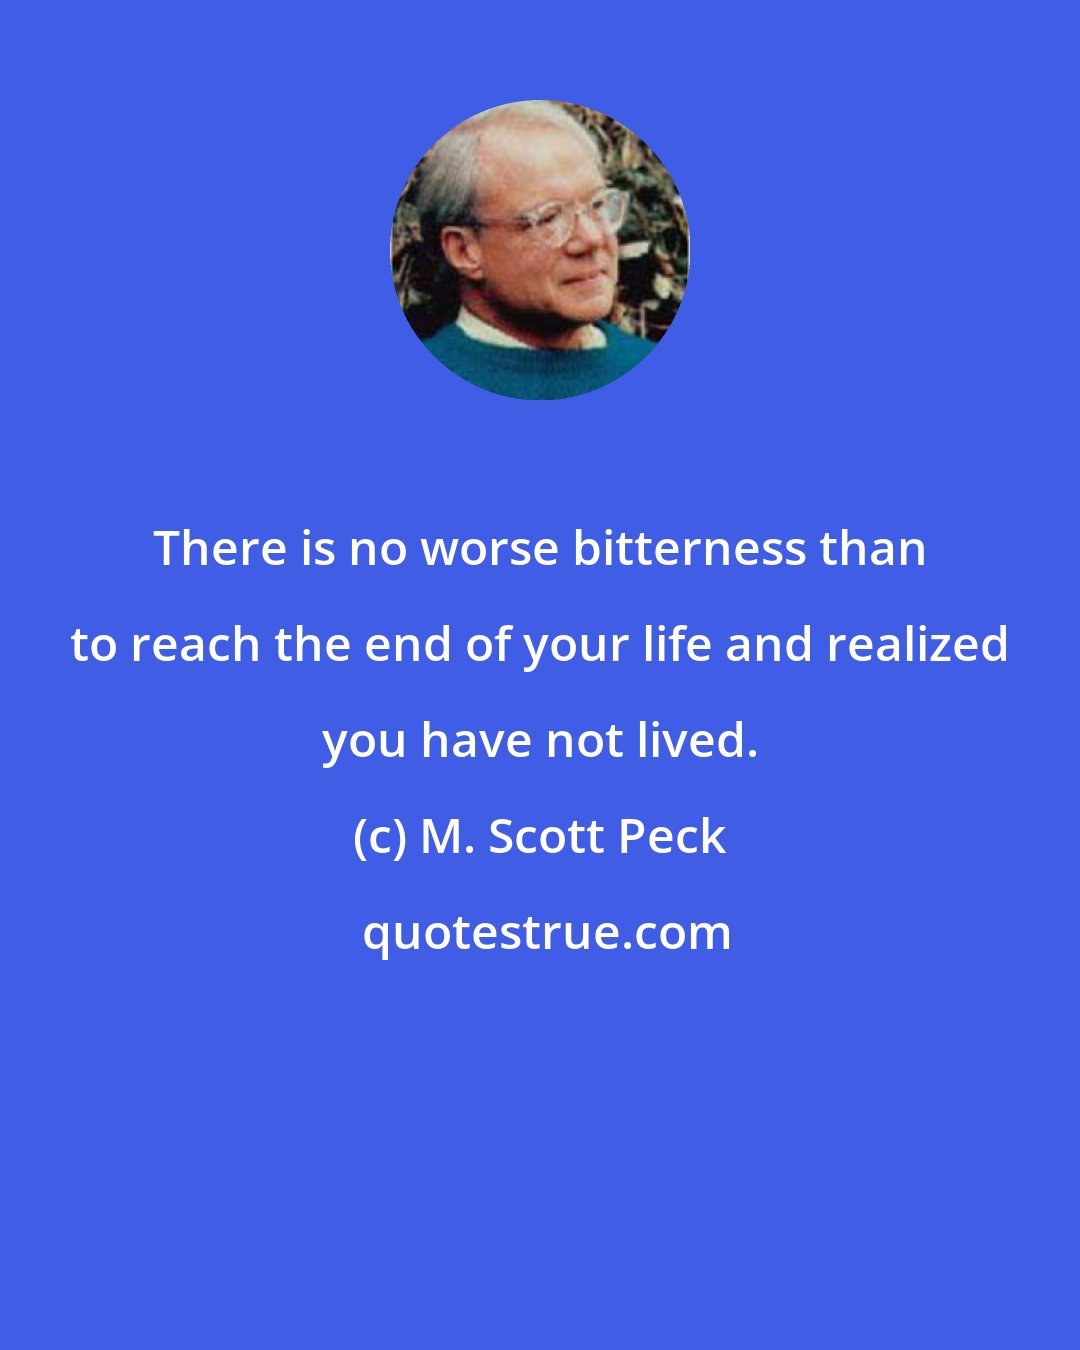 M. Scott Peck: There is no worse bitterness than to reach the end of your life and realized you have not lived.